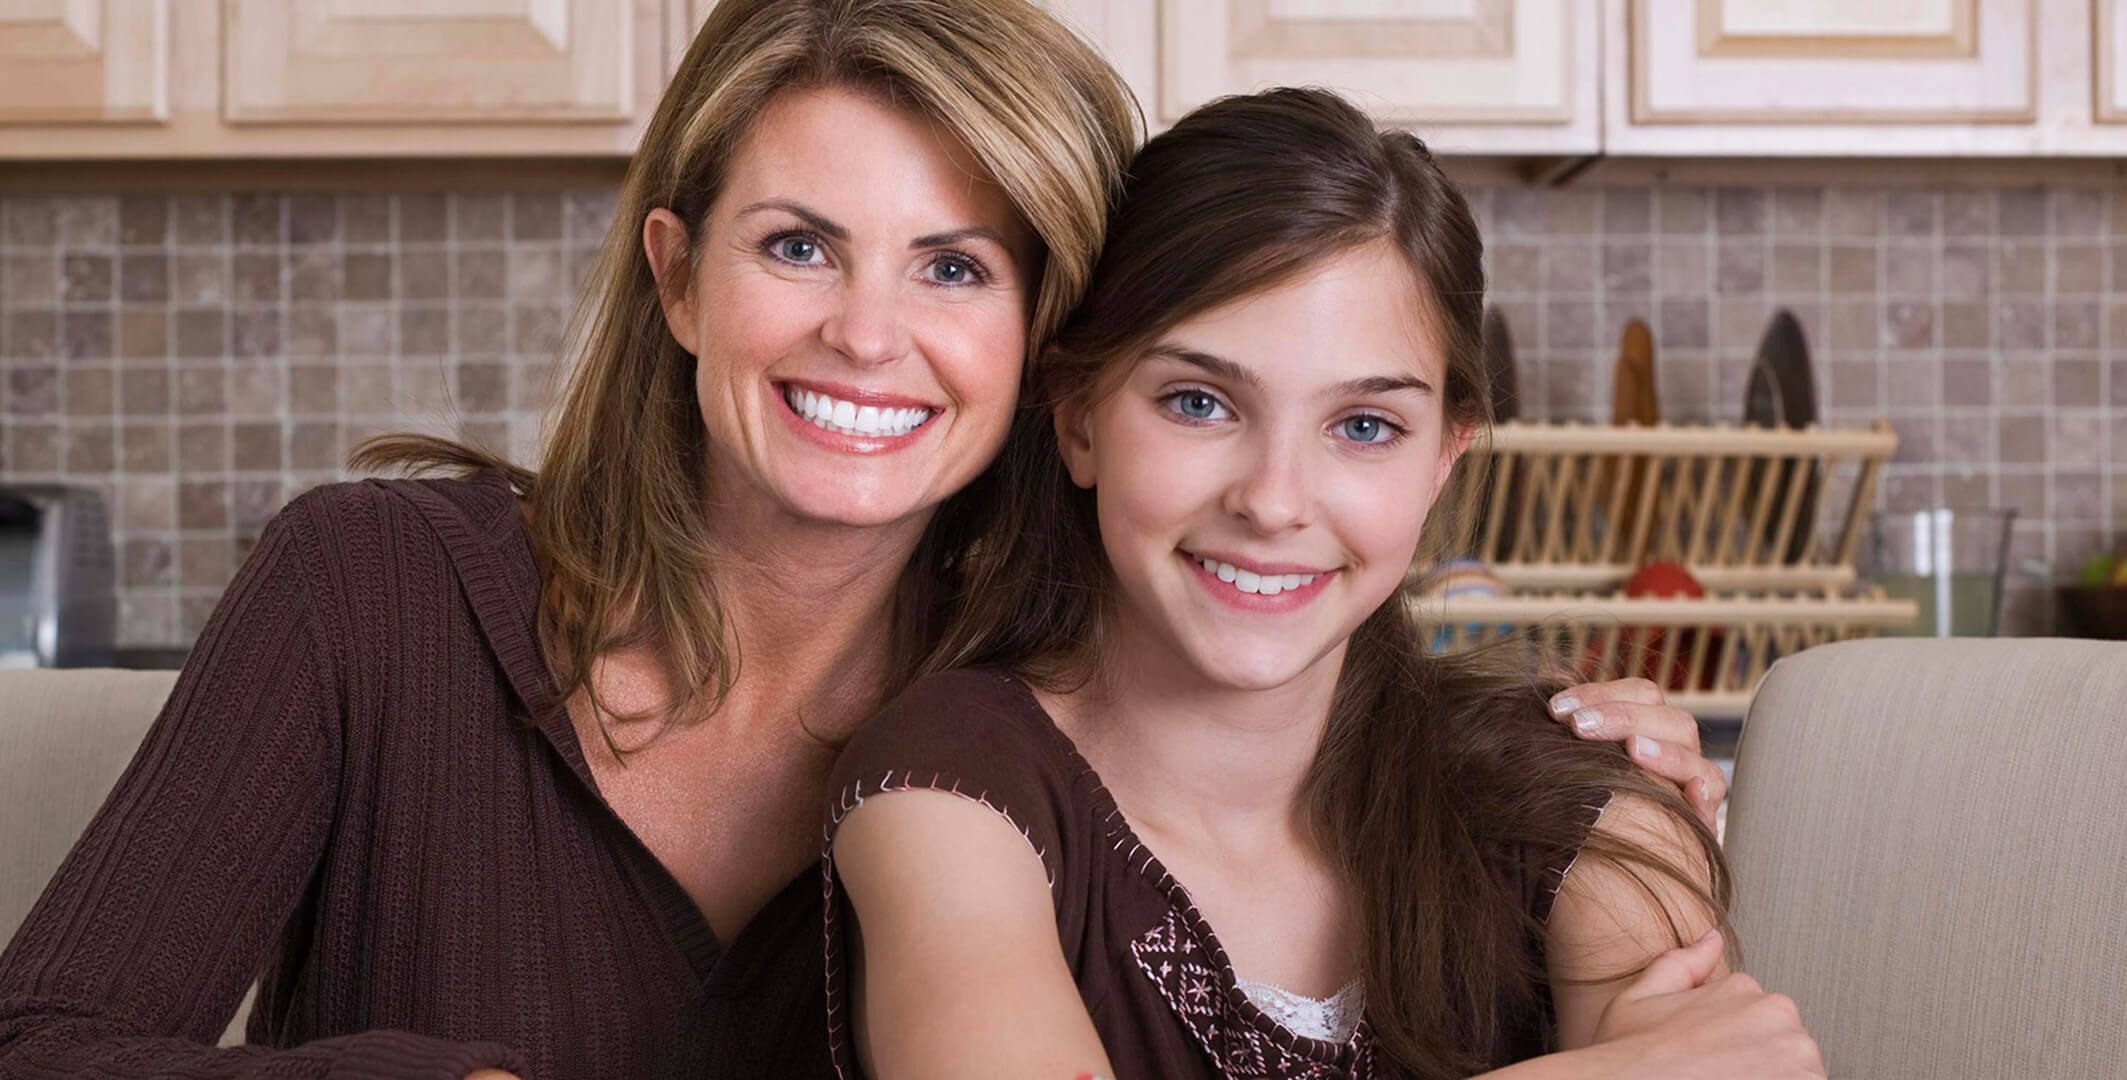 A woman and her daughter smiling